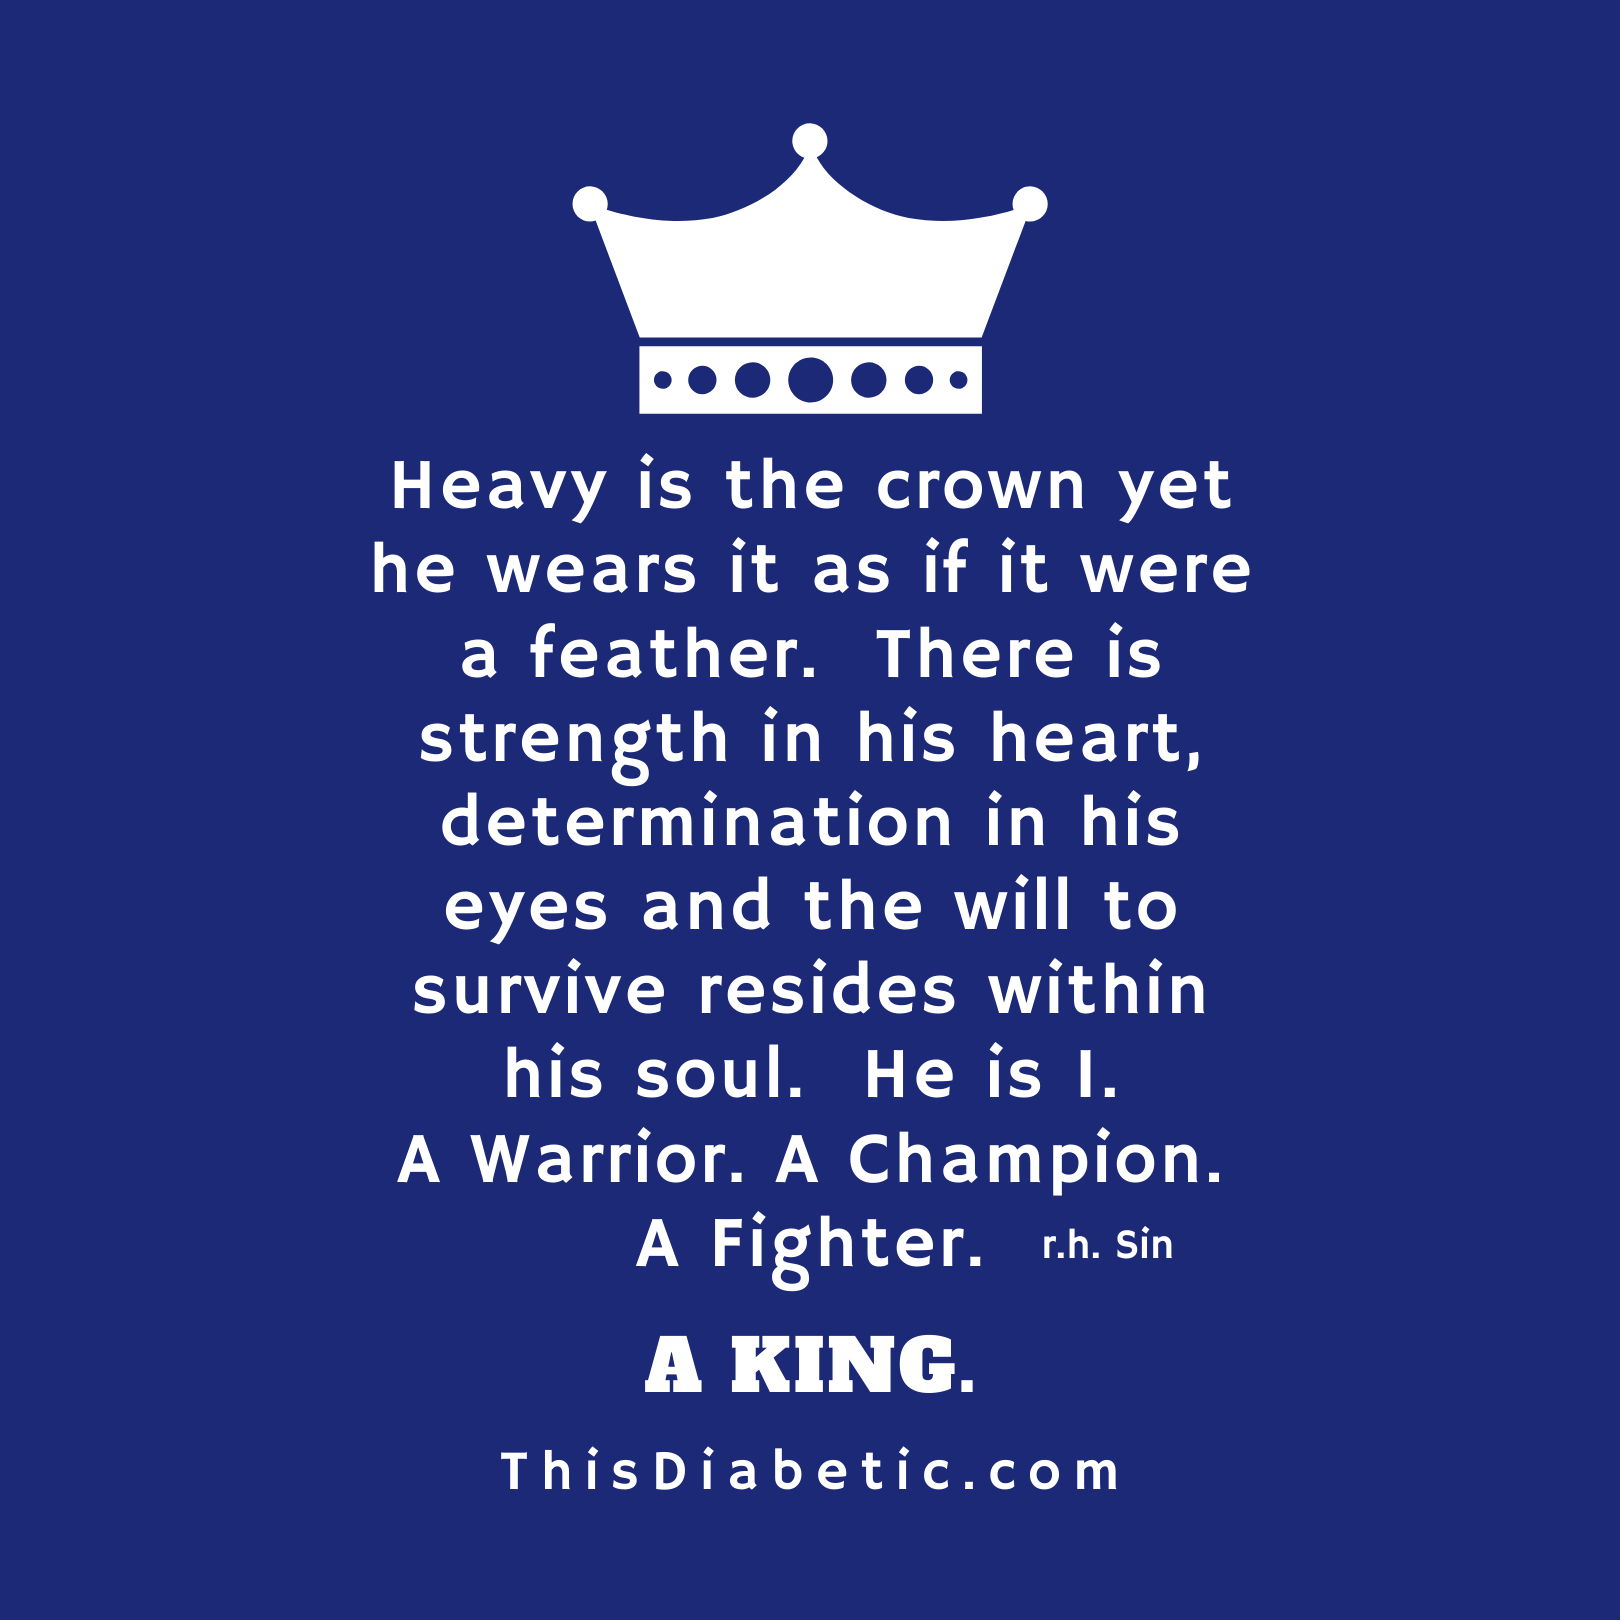 Heavy Is The Crown Yet He Wears It like Feather Sleeve Adult T-shirt - ThisDiabetic.com